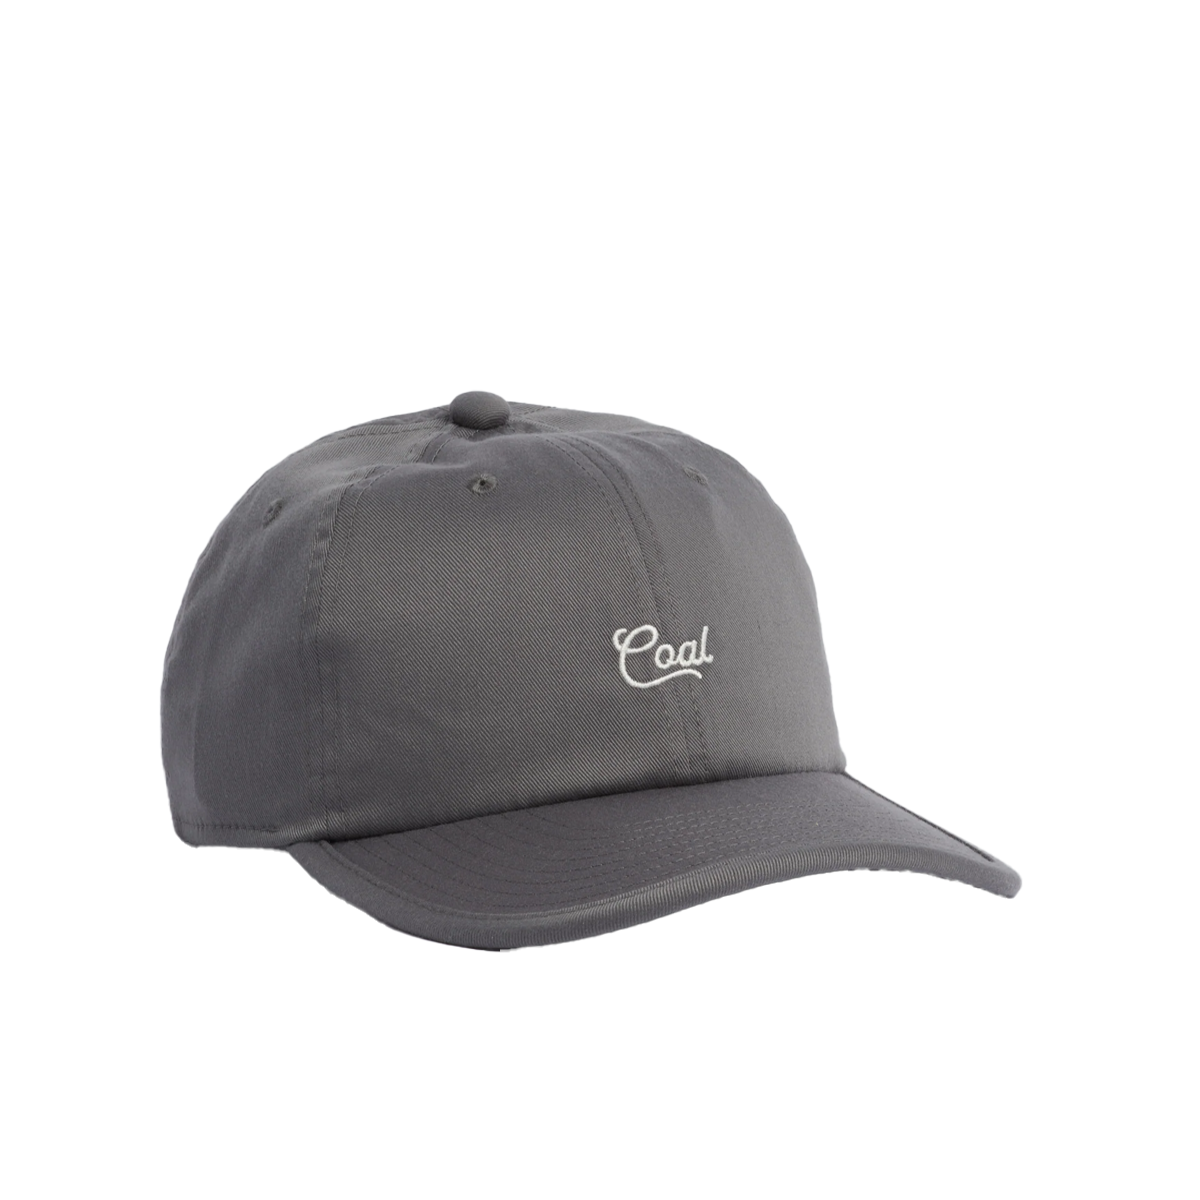 Coal The Pines Ultra Low Unstructured Hat - Assorted Colors